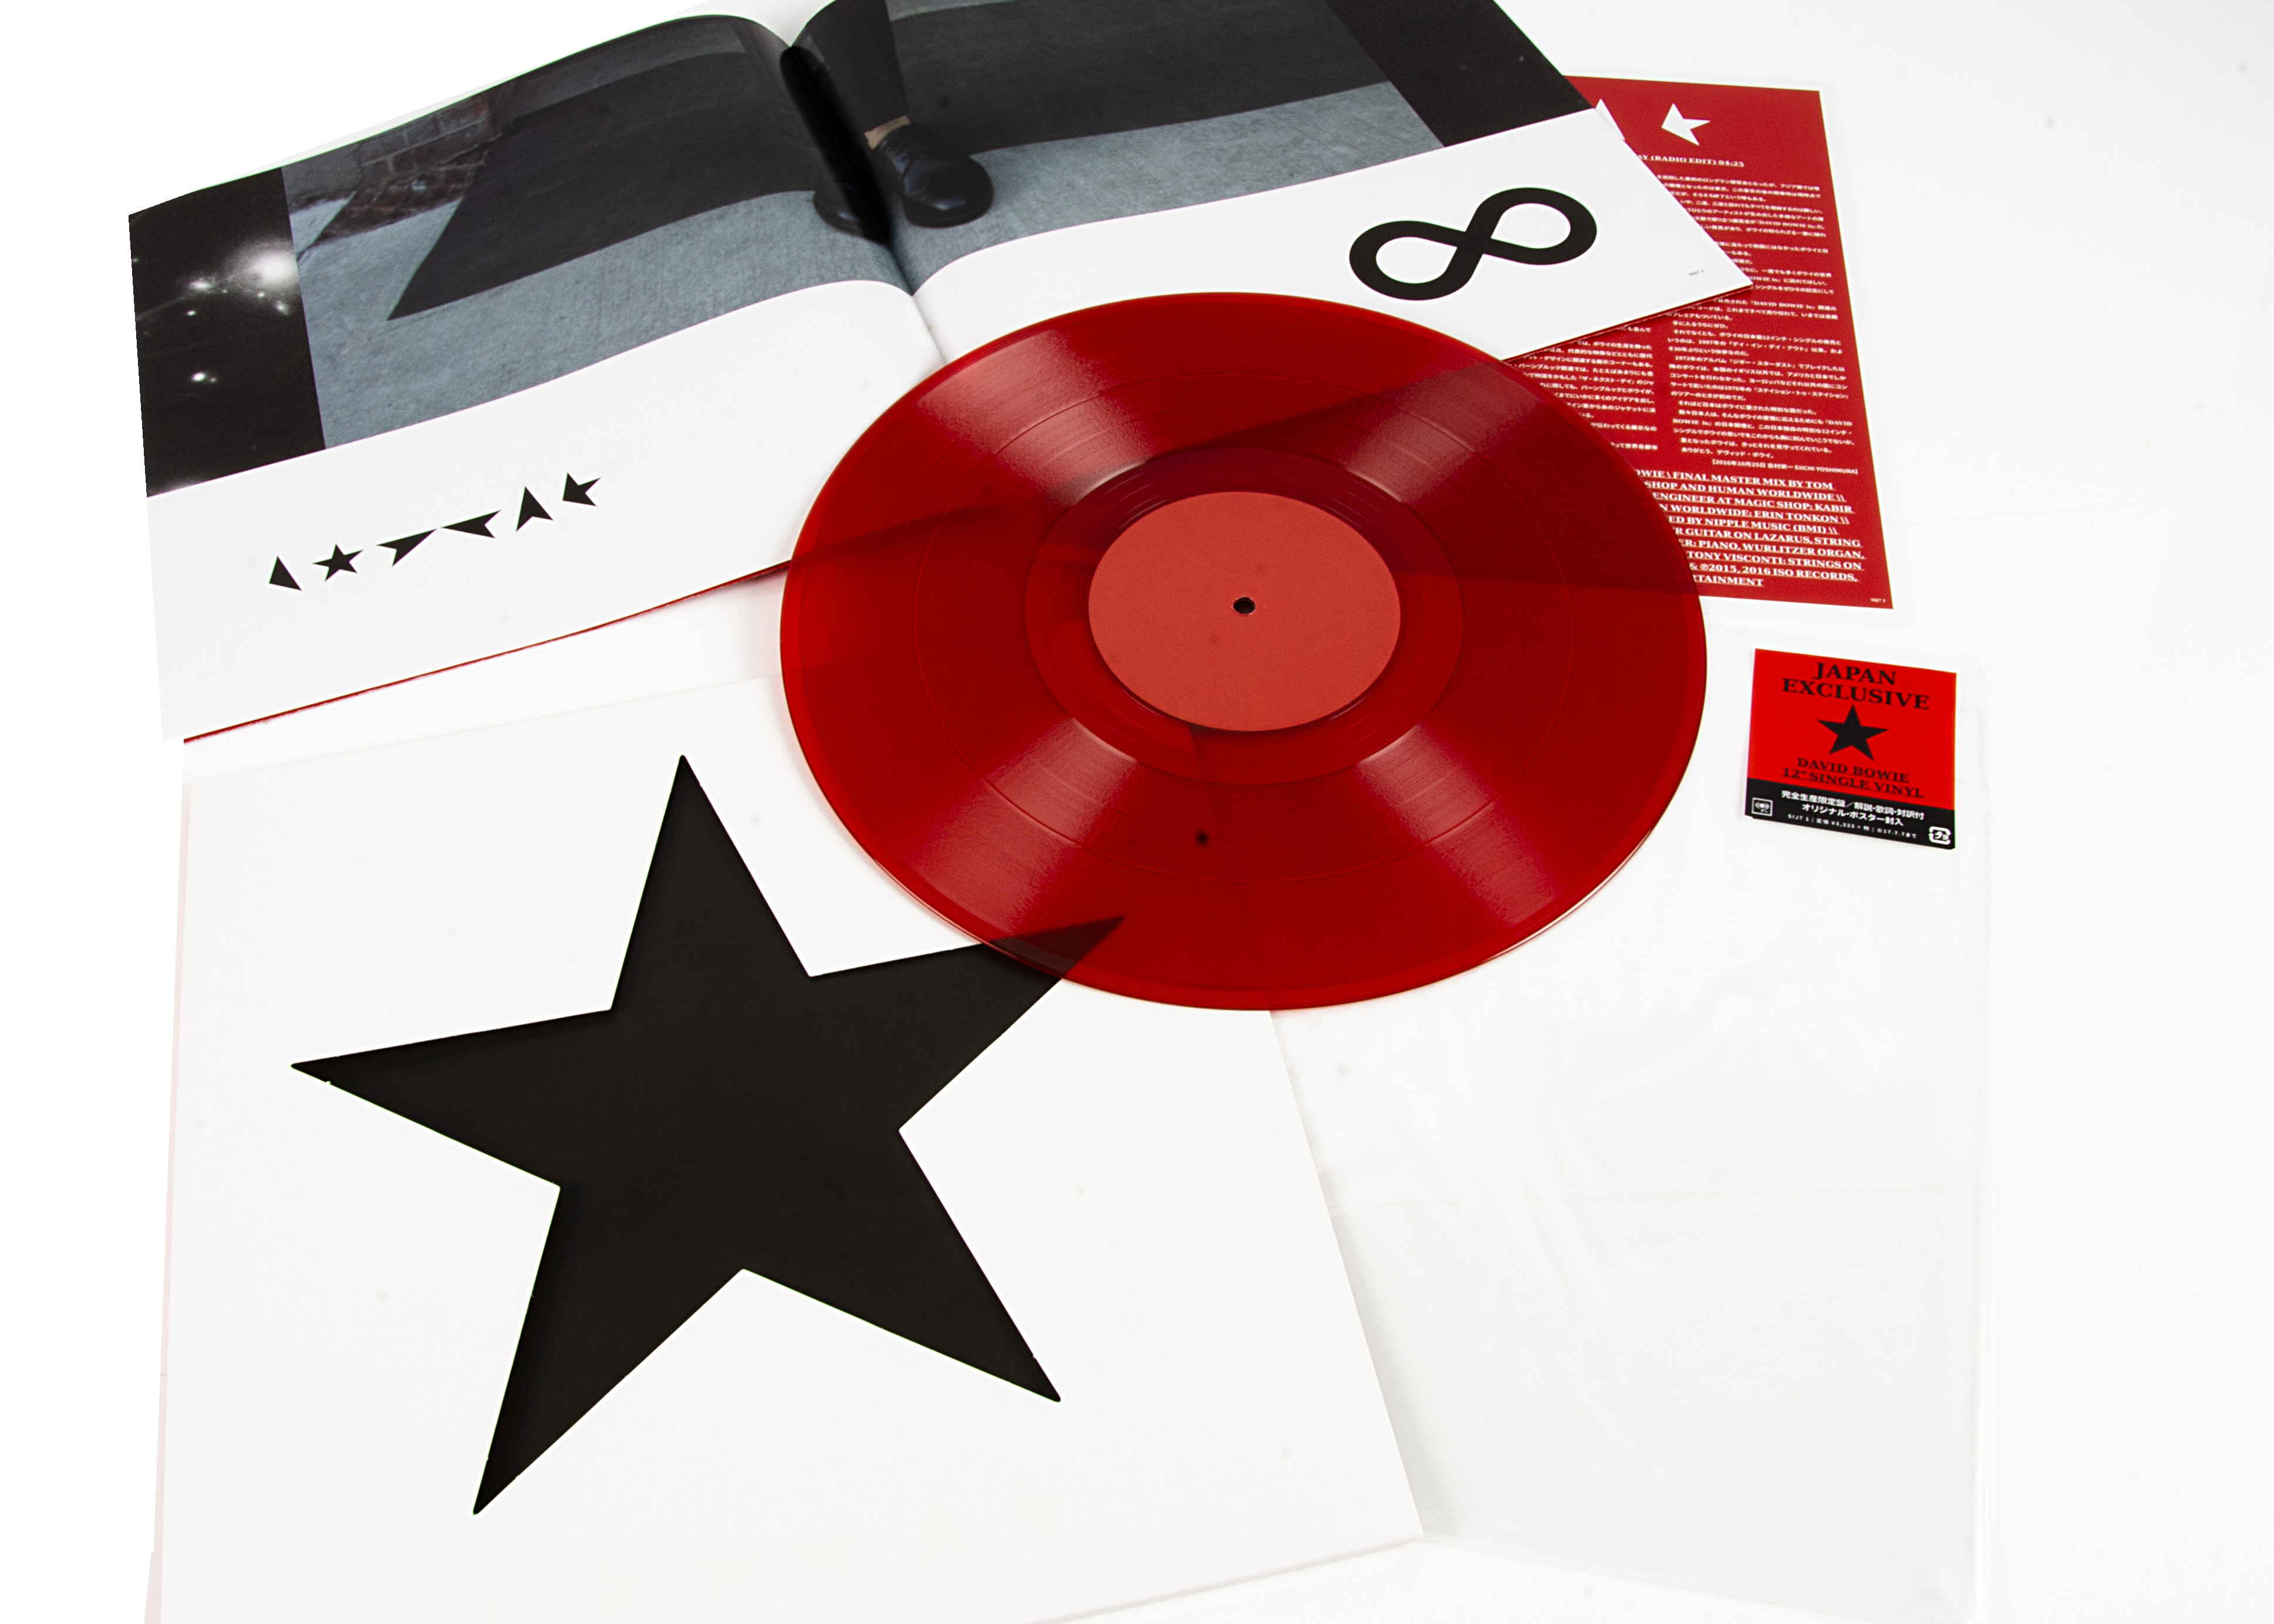 David Bowie 12" Single, Blackstar 12" Single - Exclusive Japanese release 2017 from the V&A 'David